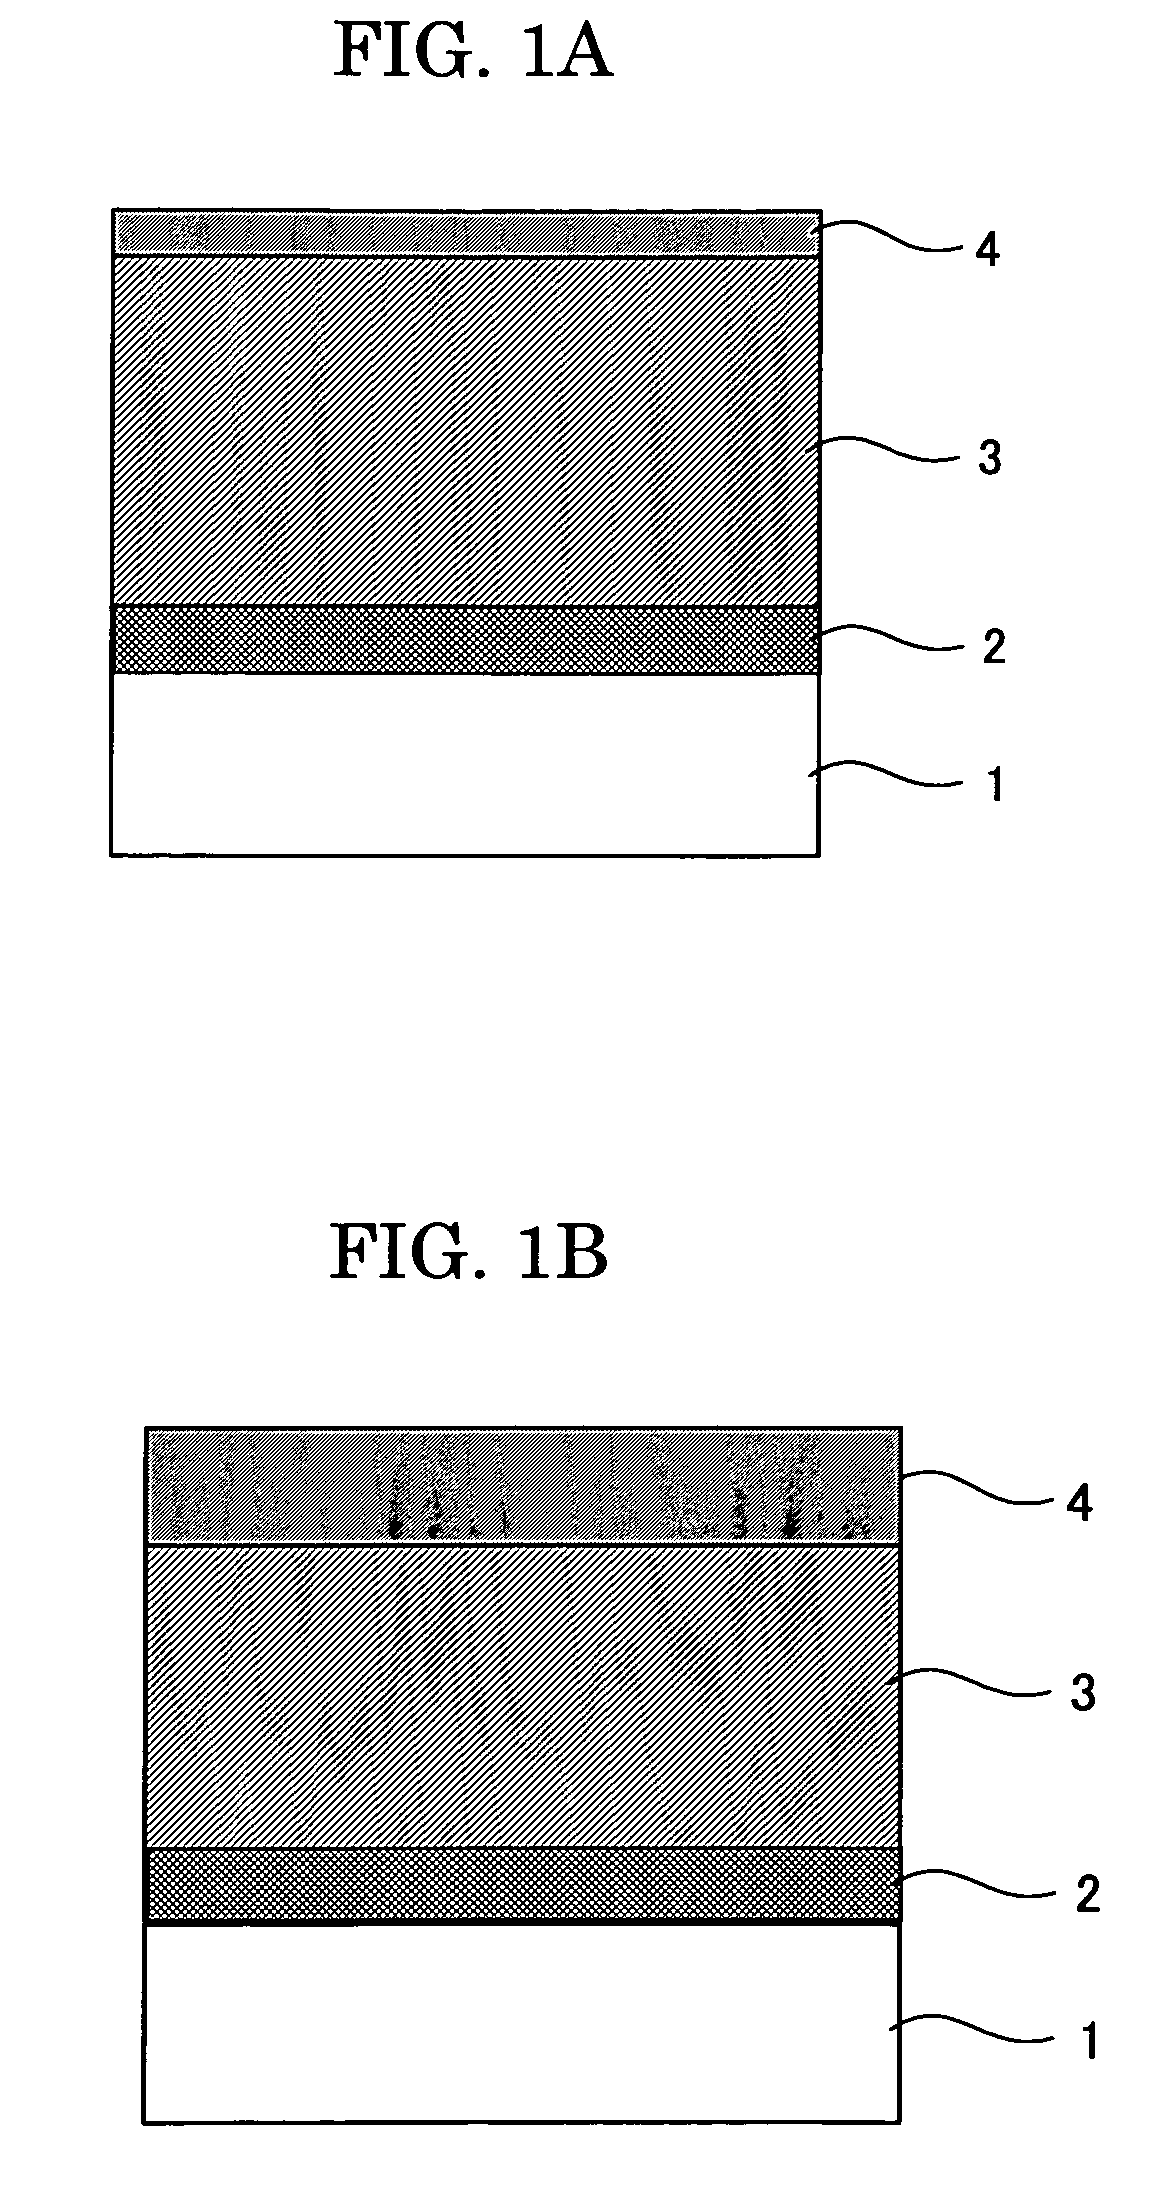 Image forming process, image forming apparatus, and process cartridge